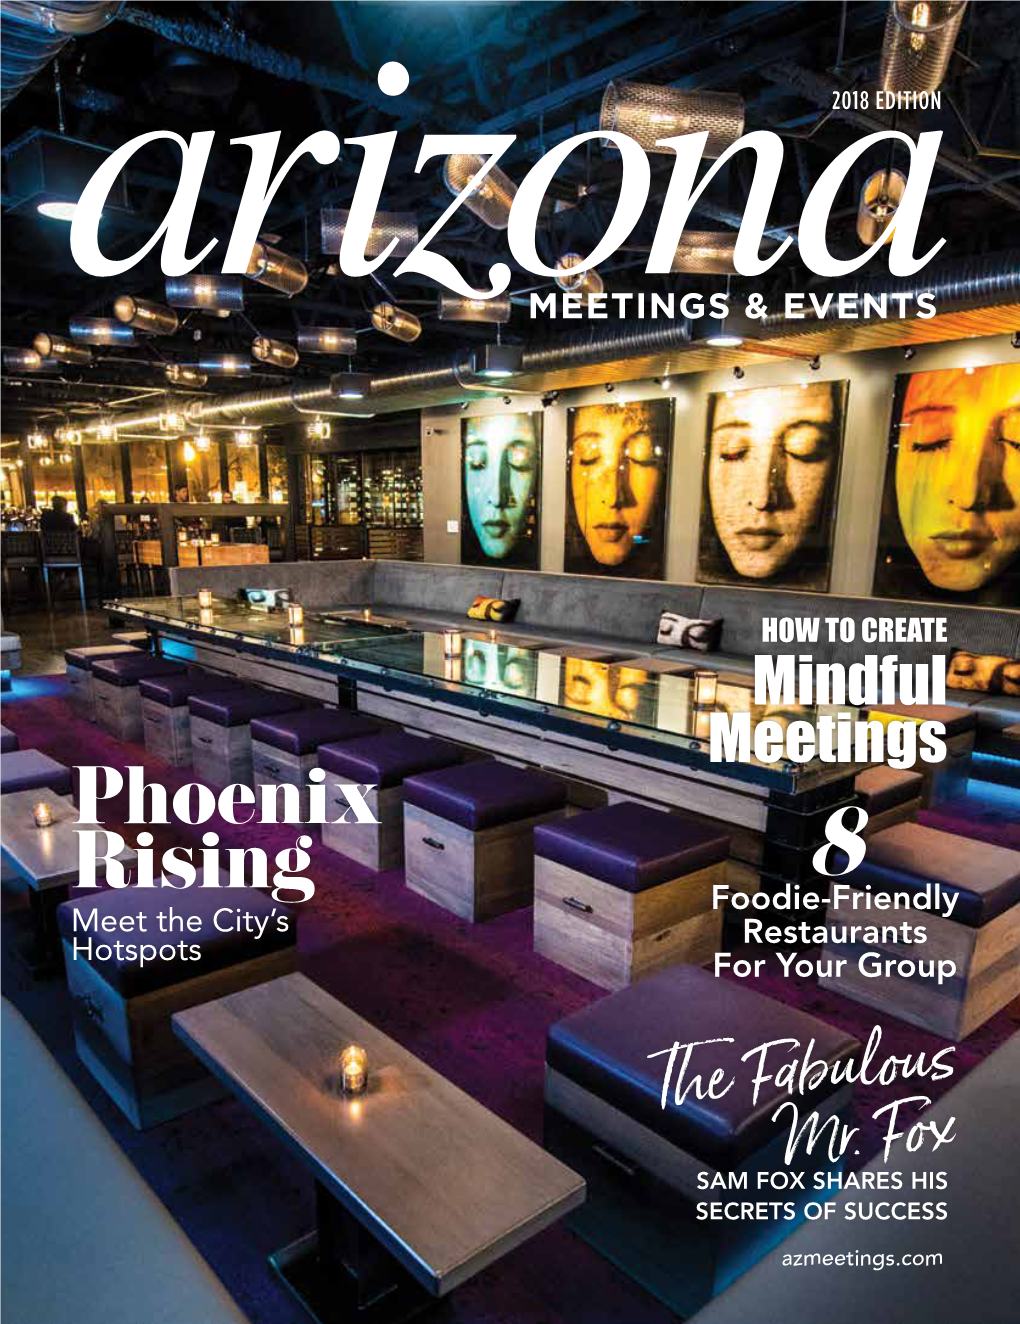 Phoenix Rising Foodie-Friendly8 Meet the City’S Restaurants Hotspots for Your Group